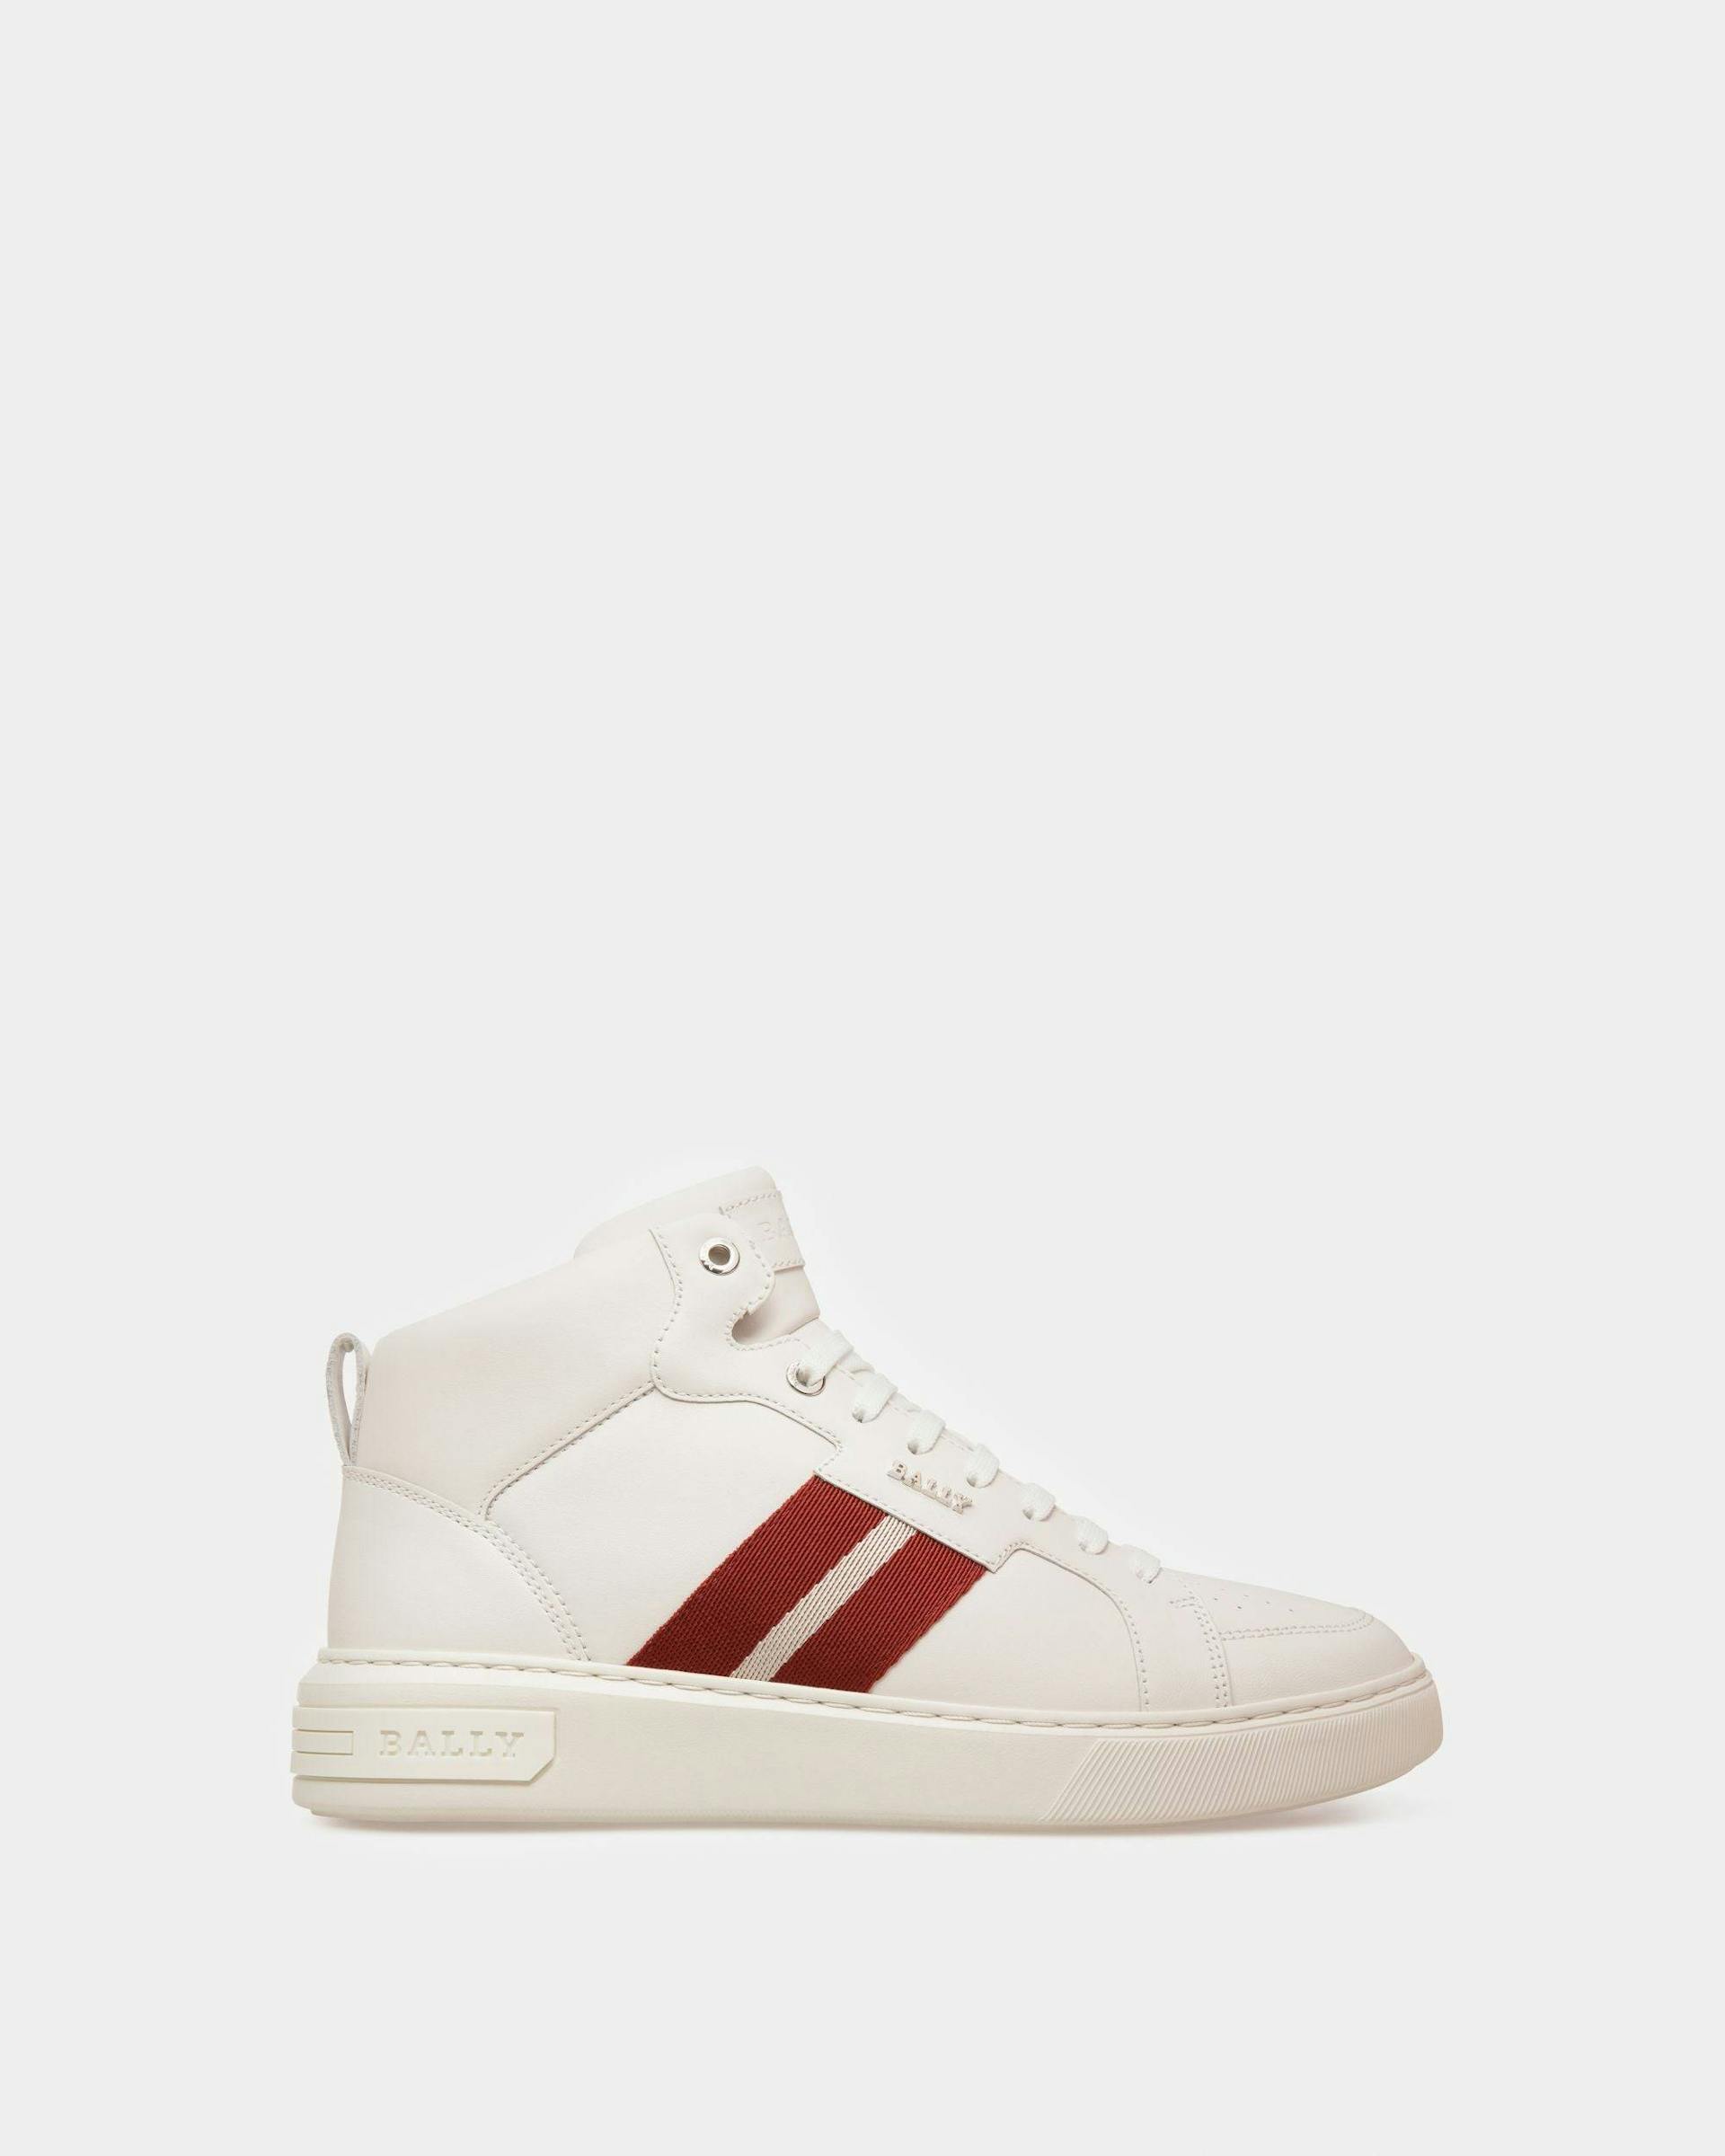 Myles Leather Sneakers In White - Men's - Bally - 01